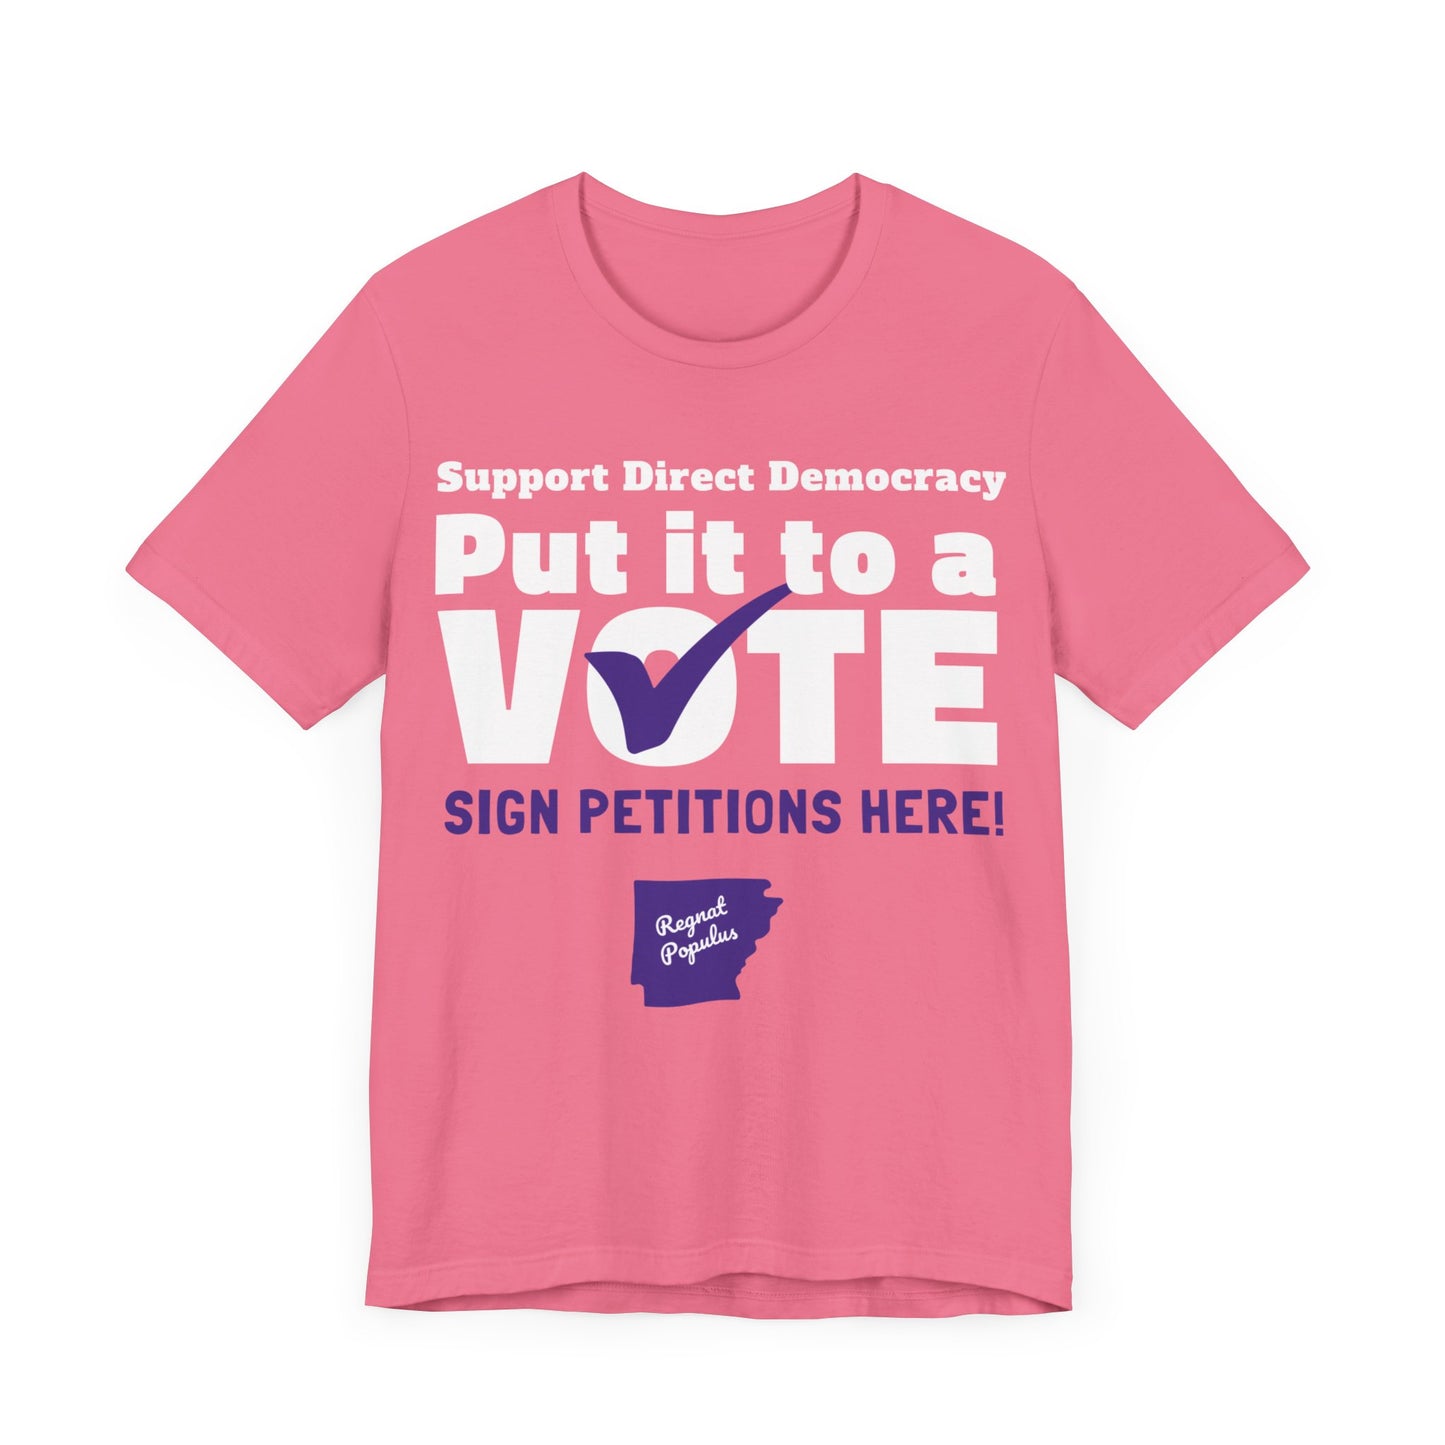 Support Direct Democracy Put It To A Vote Sign Petition Here Shirt, Regnat Populus Shirt, Politics Shirt